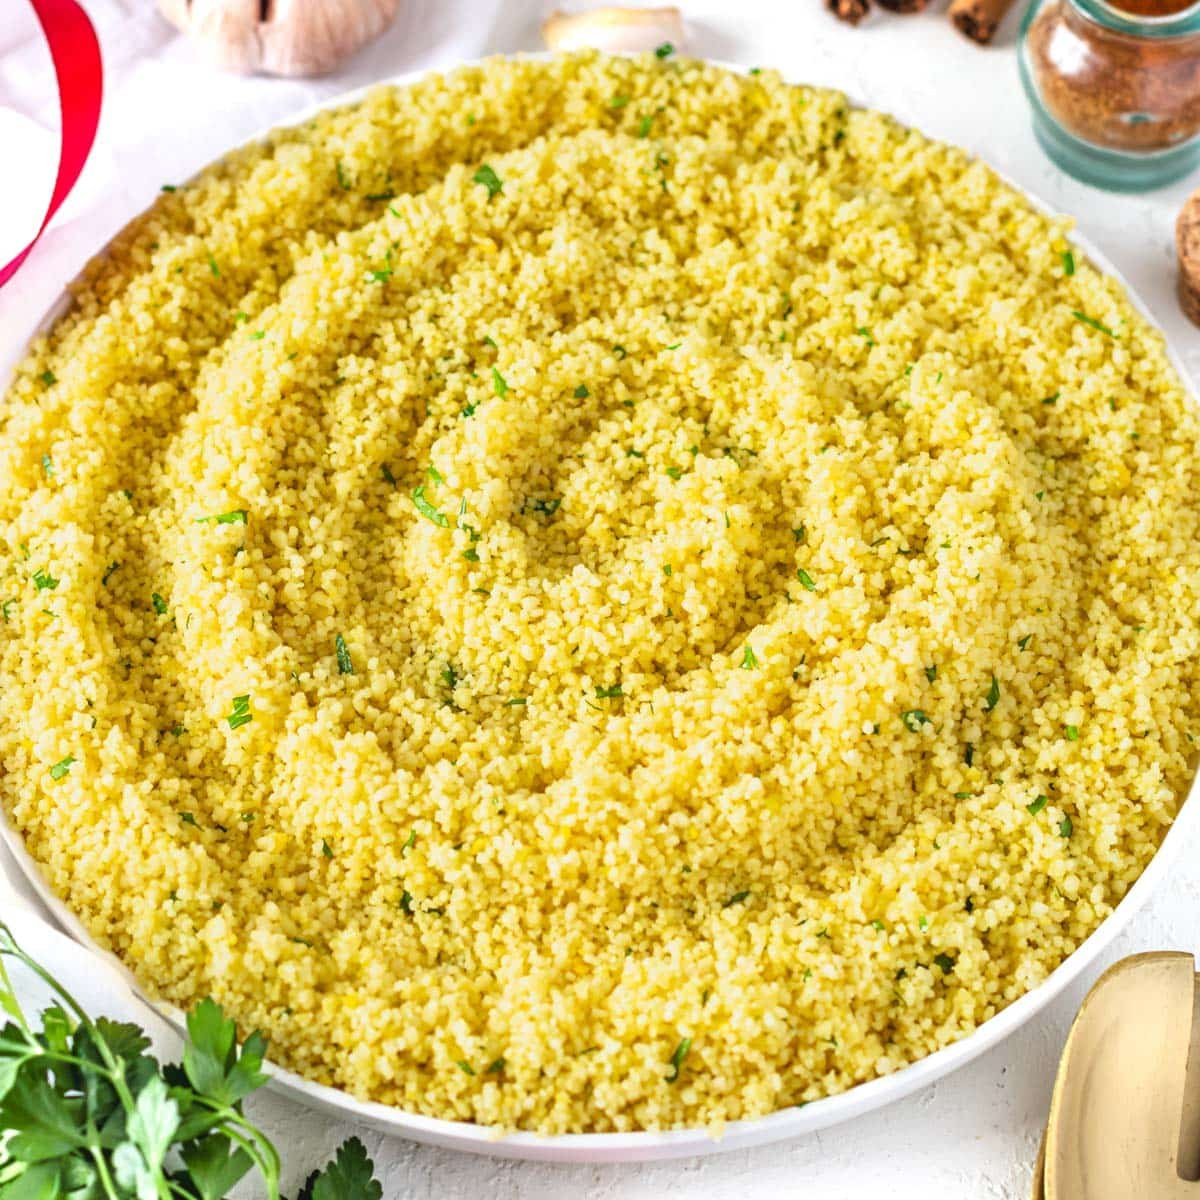 Yellow couscous with spices served on a white plate